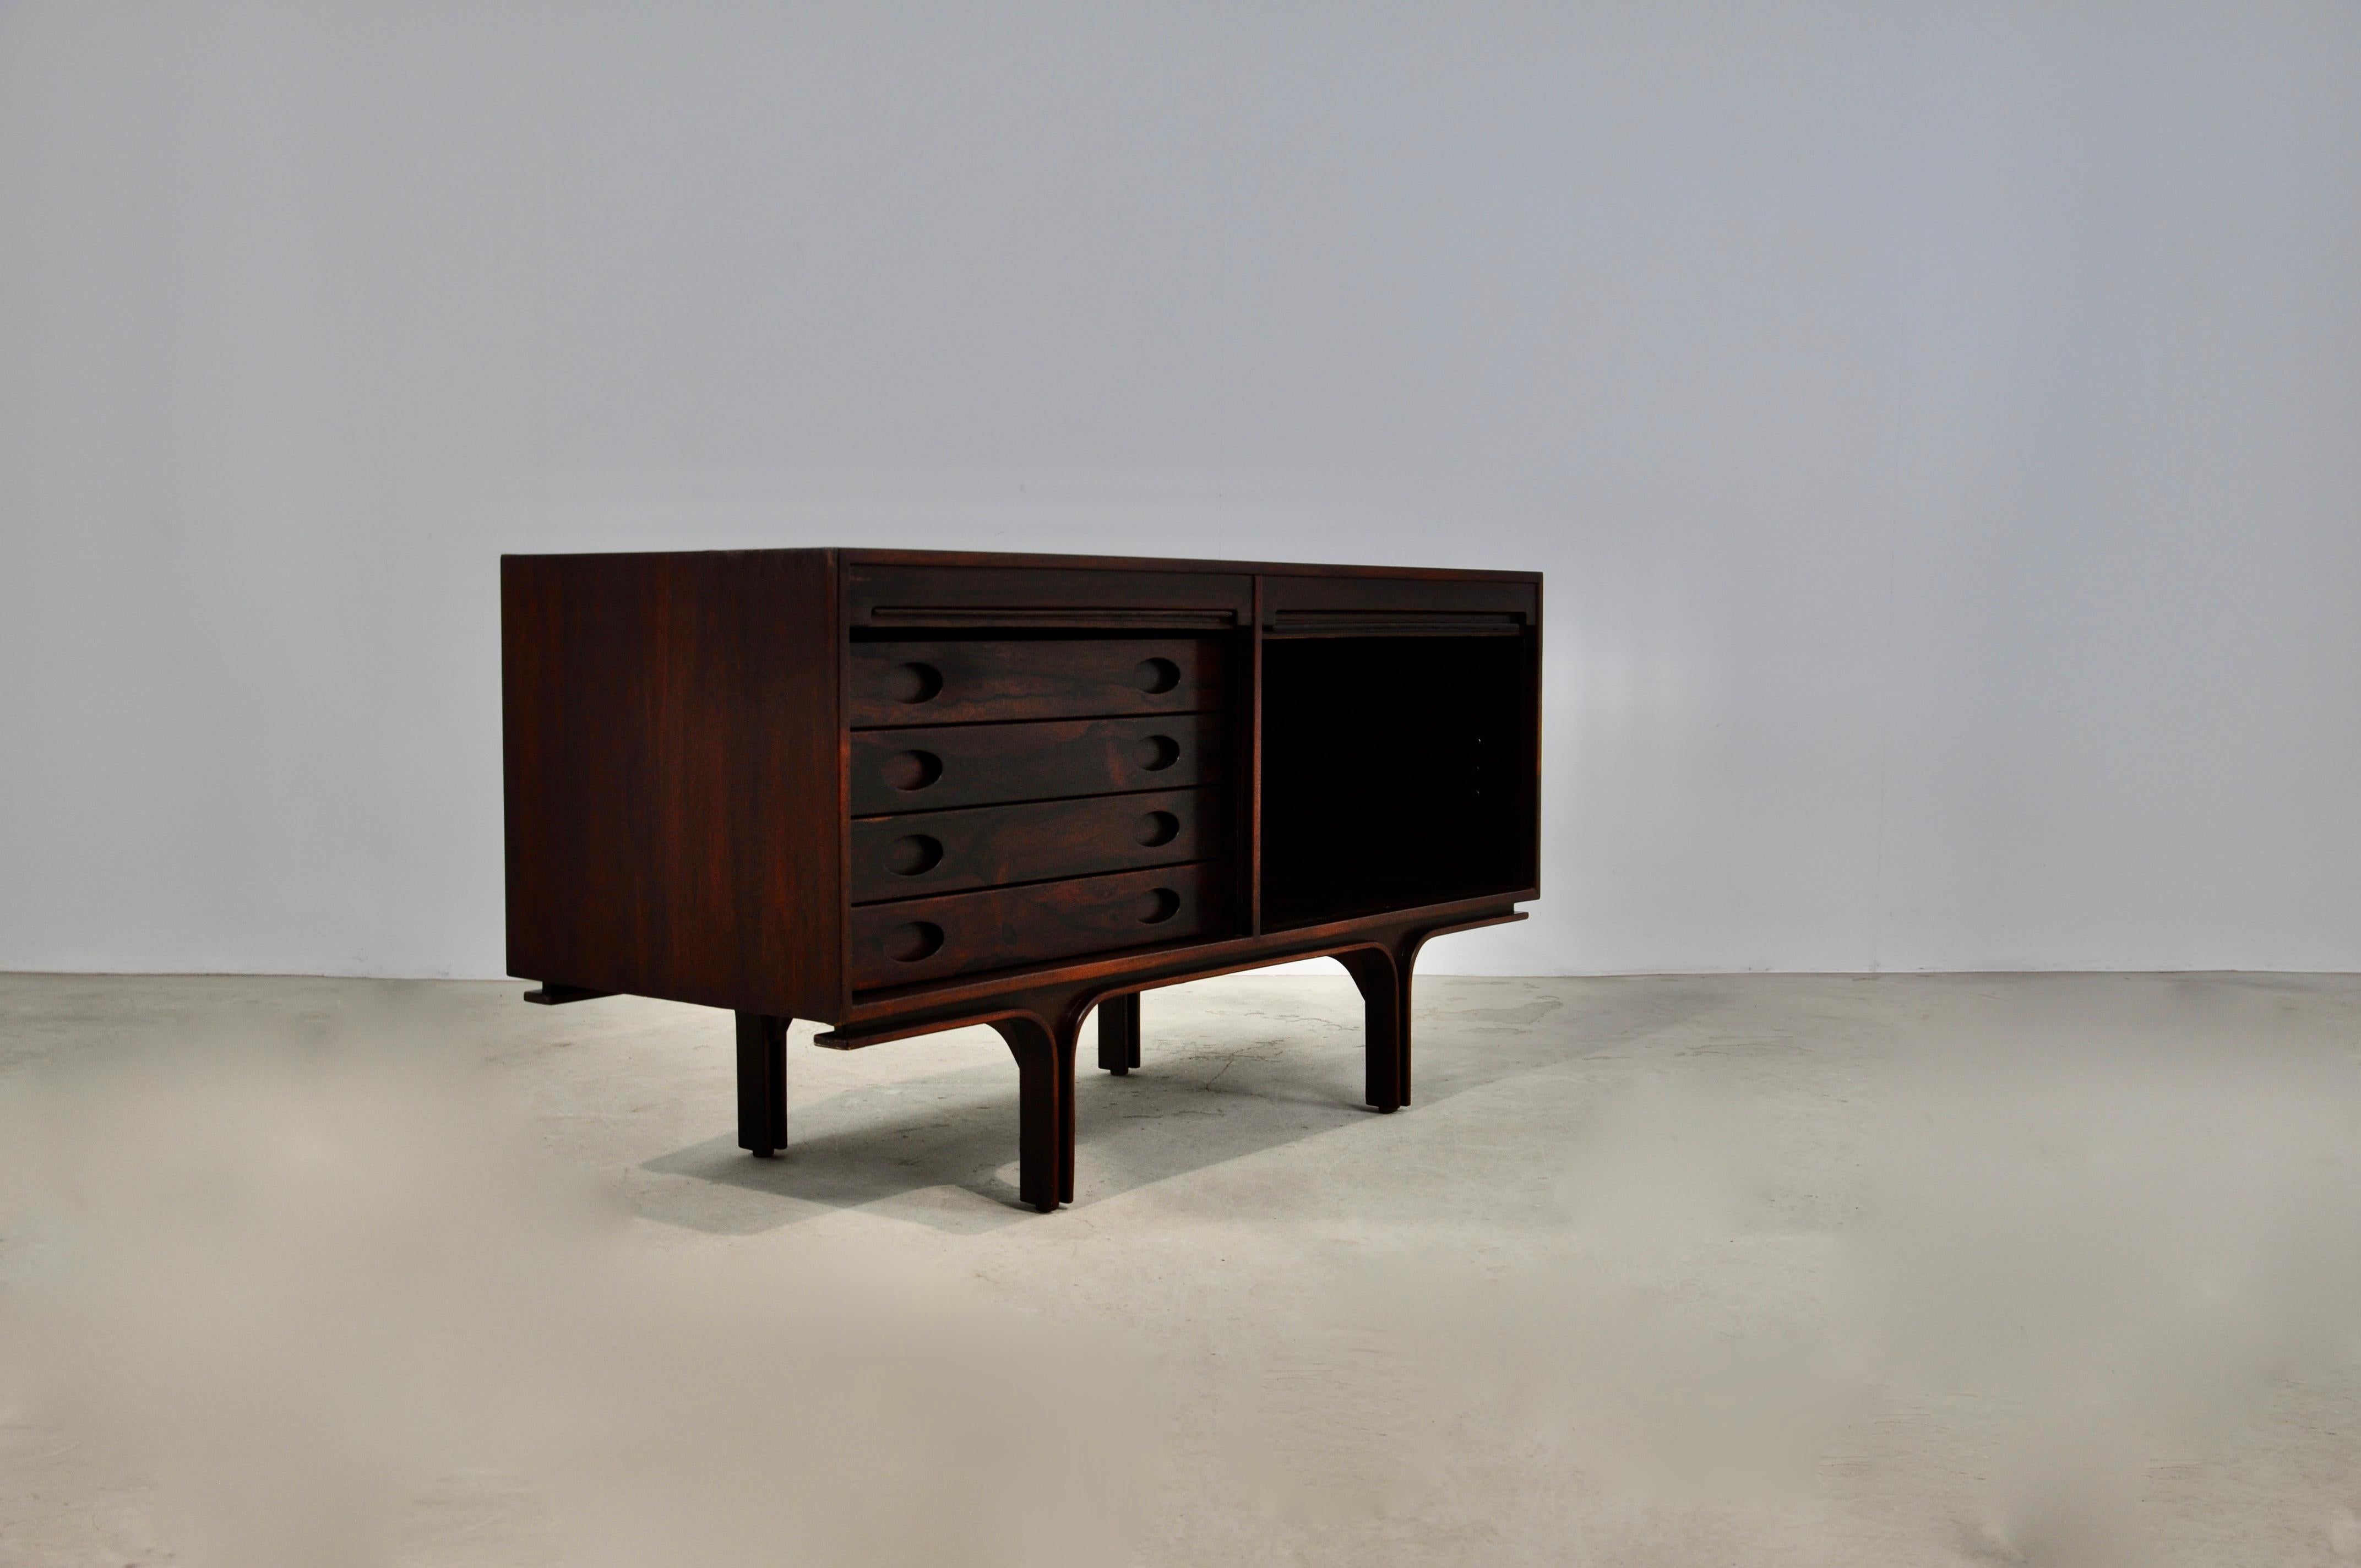 Wooden sideboard composed of two doors and 4 drawers. Wear due to time and age of the sideboard.